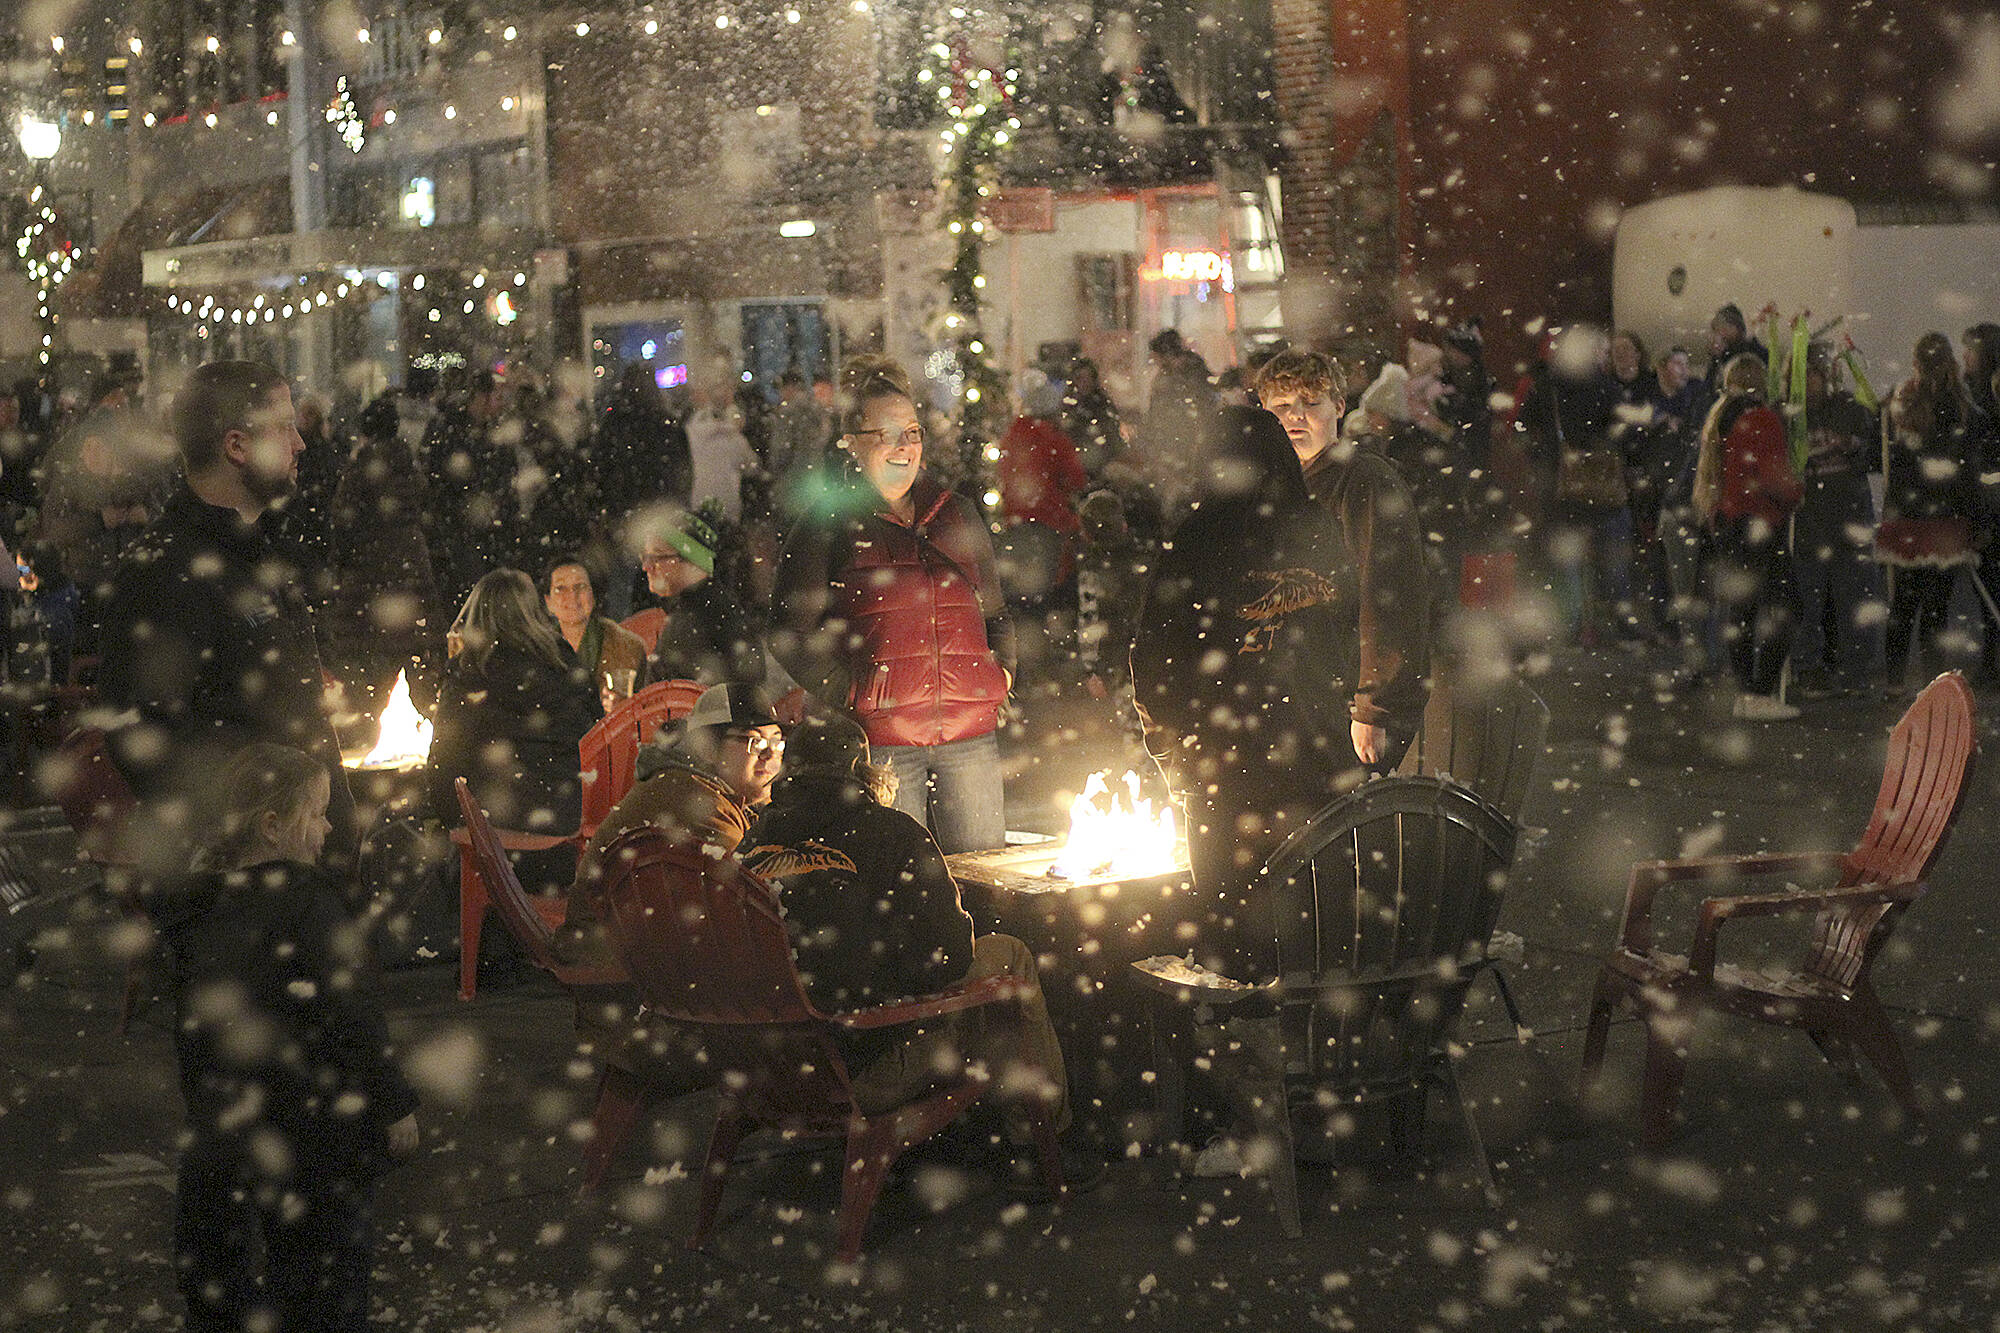 Photo by Ray Miller-Still 
Visitors to Cole Street have been enjoying weekly “snow” events every Friday from 5 to 5:30, when portions of the street close to allow folks to enjoy food and drinks outdoors around fire pits (if the weather is clear). Going into January, the snow events are expected to move to Saturdays at the same time.